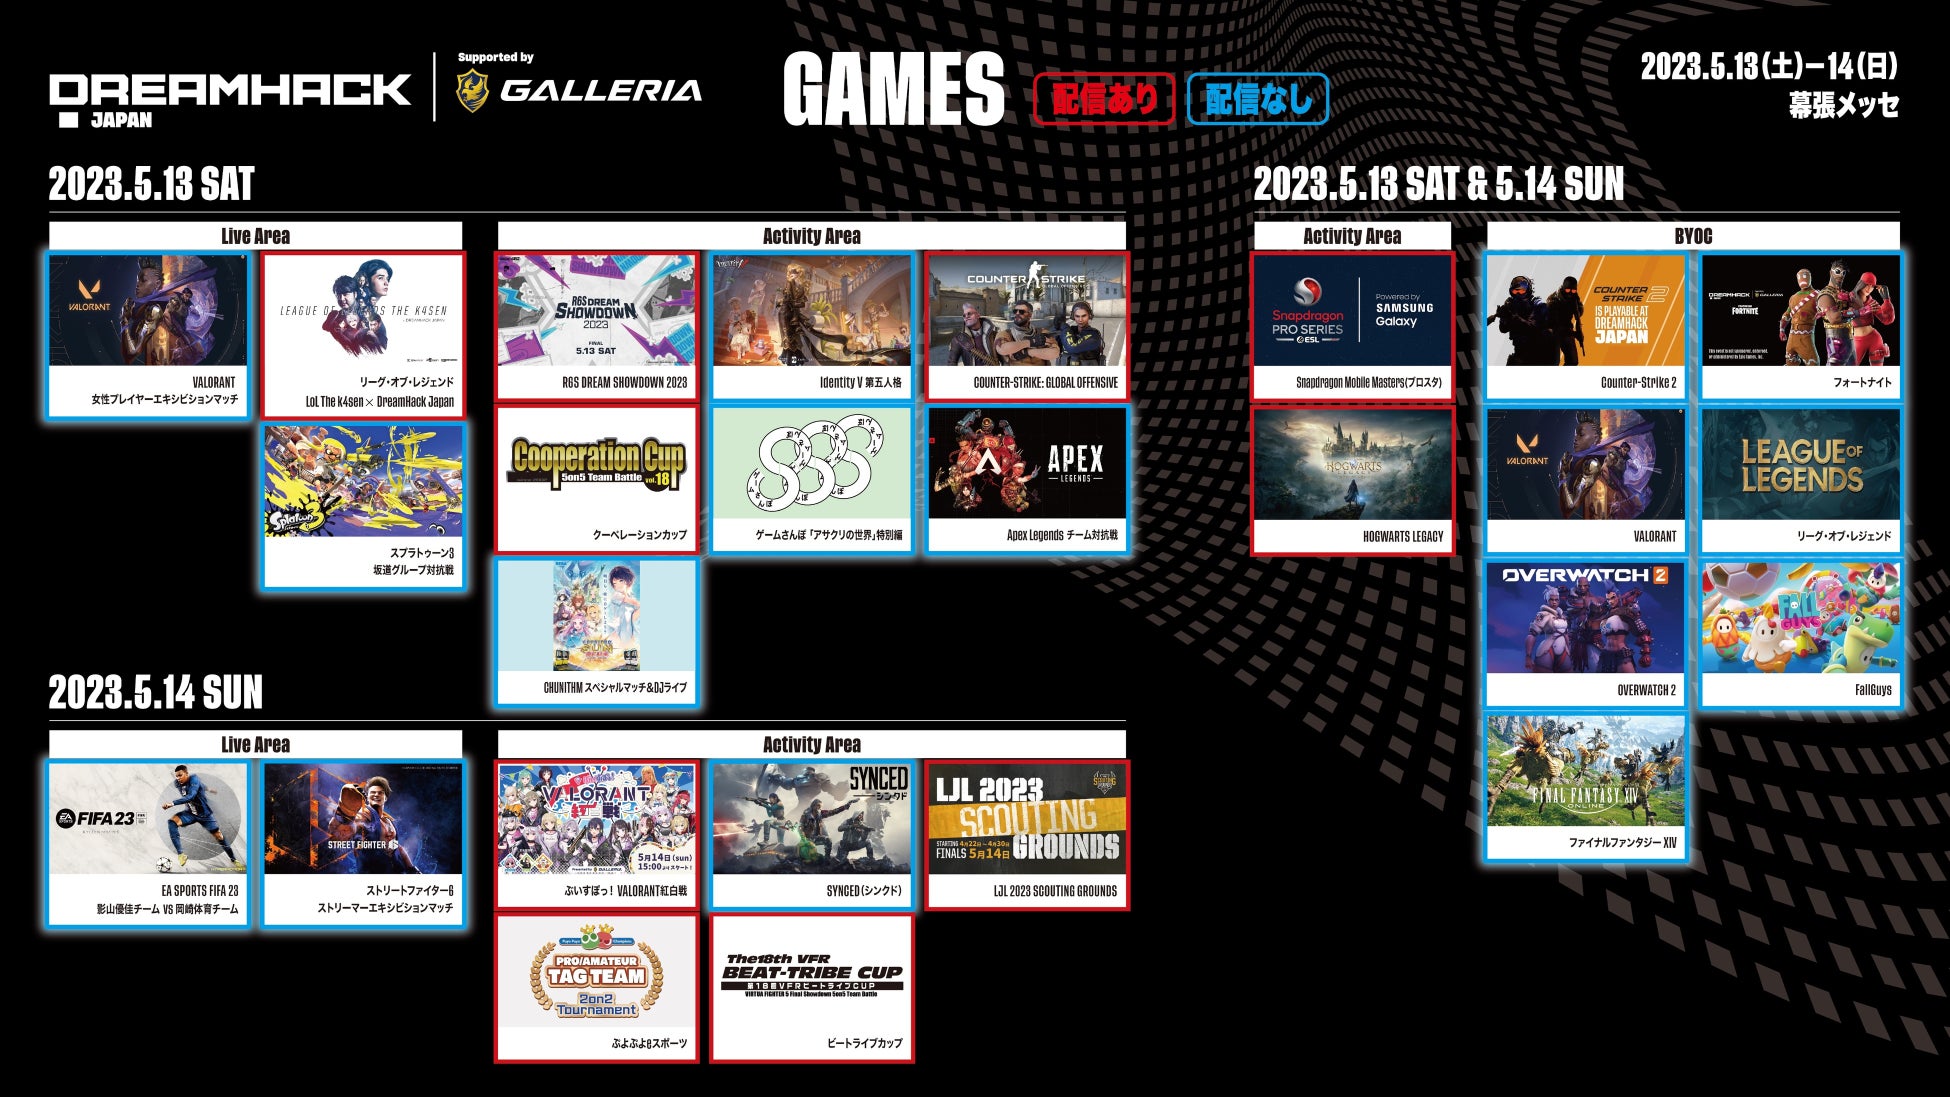 「DreamHack Japan 2023 Supported by GALLERIA」協賛ブース情報公開